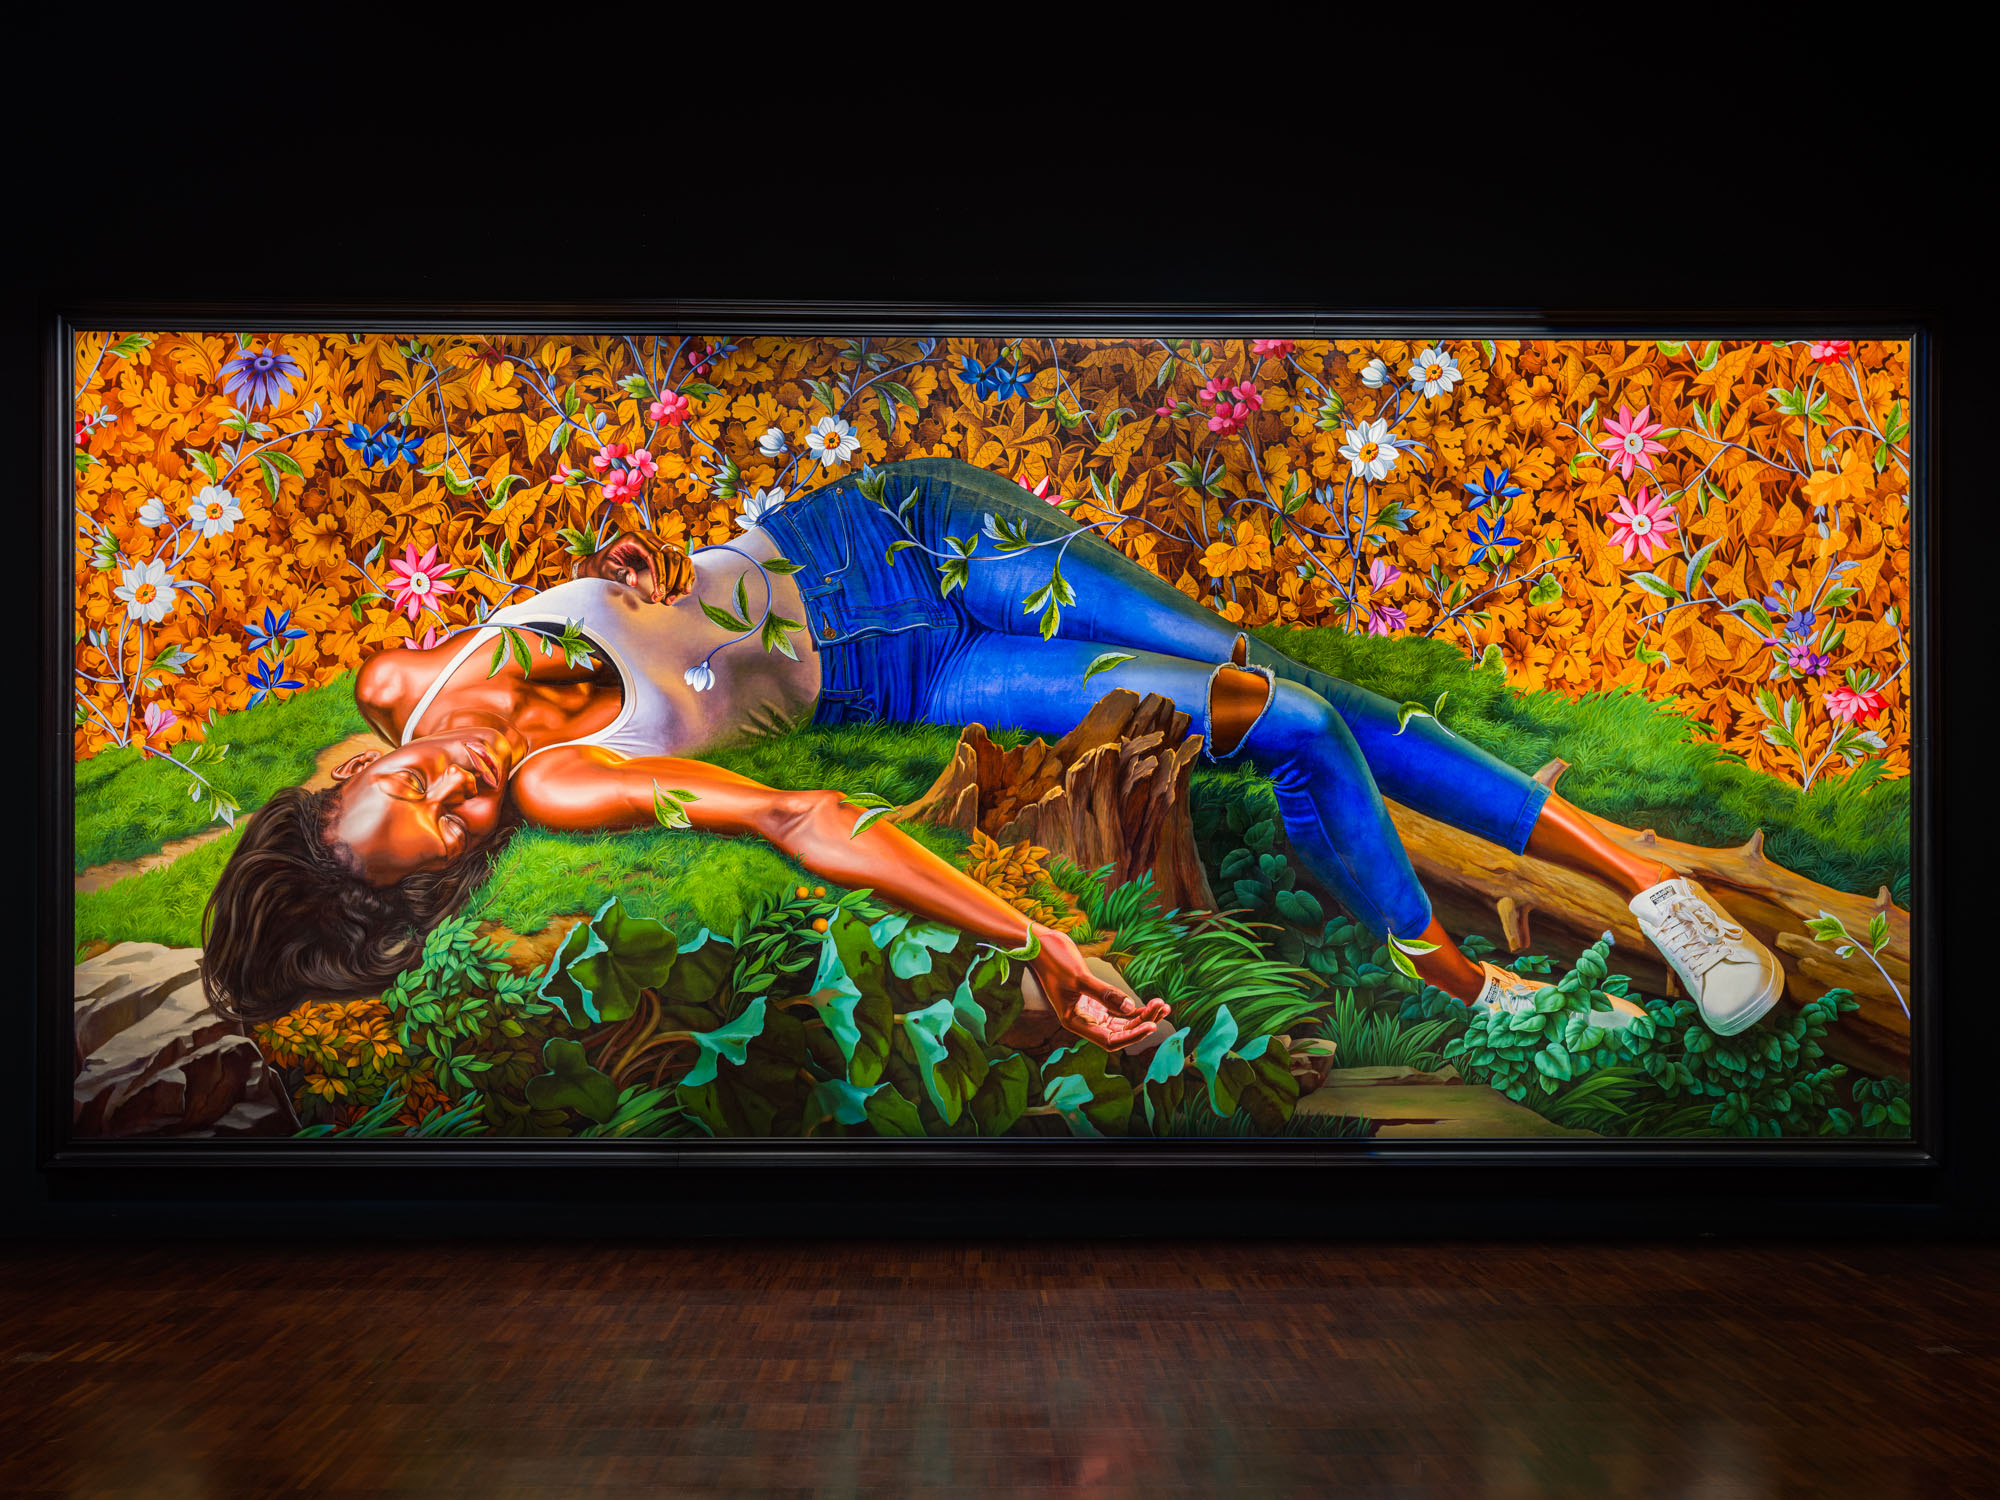 ©️ 2022 Kehinde Wiley Courtesy of the artist and Templon, Paris – Brussels – New York. Photo: Ugo Carmeni.